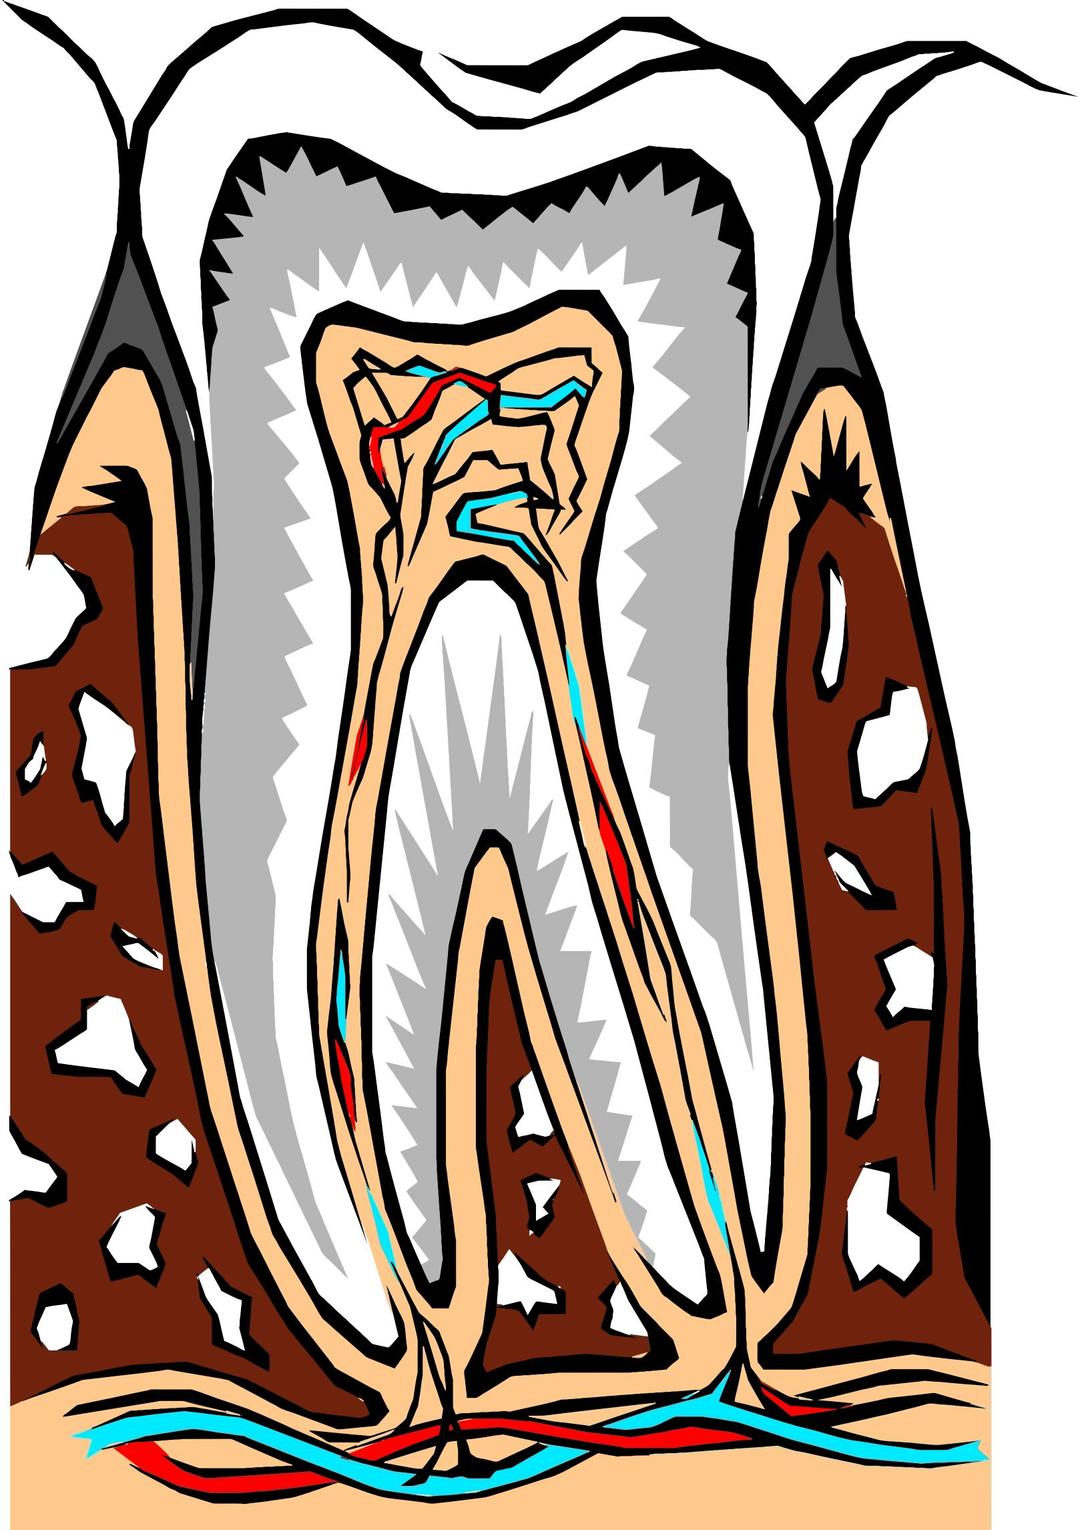 Tooth Cross Section Illustration png transparent